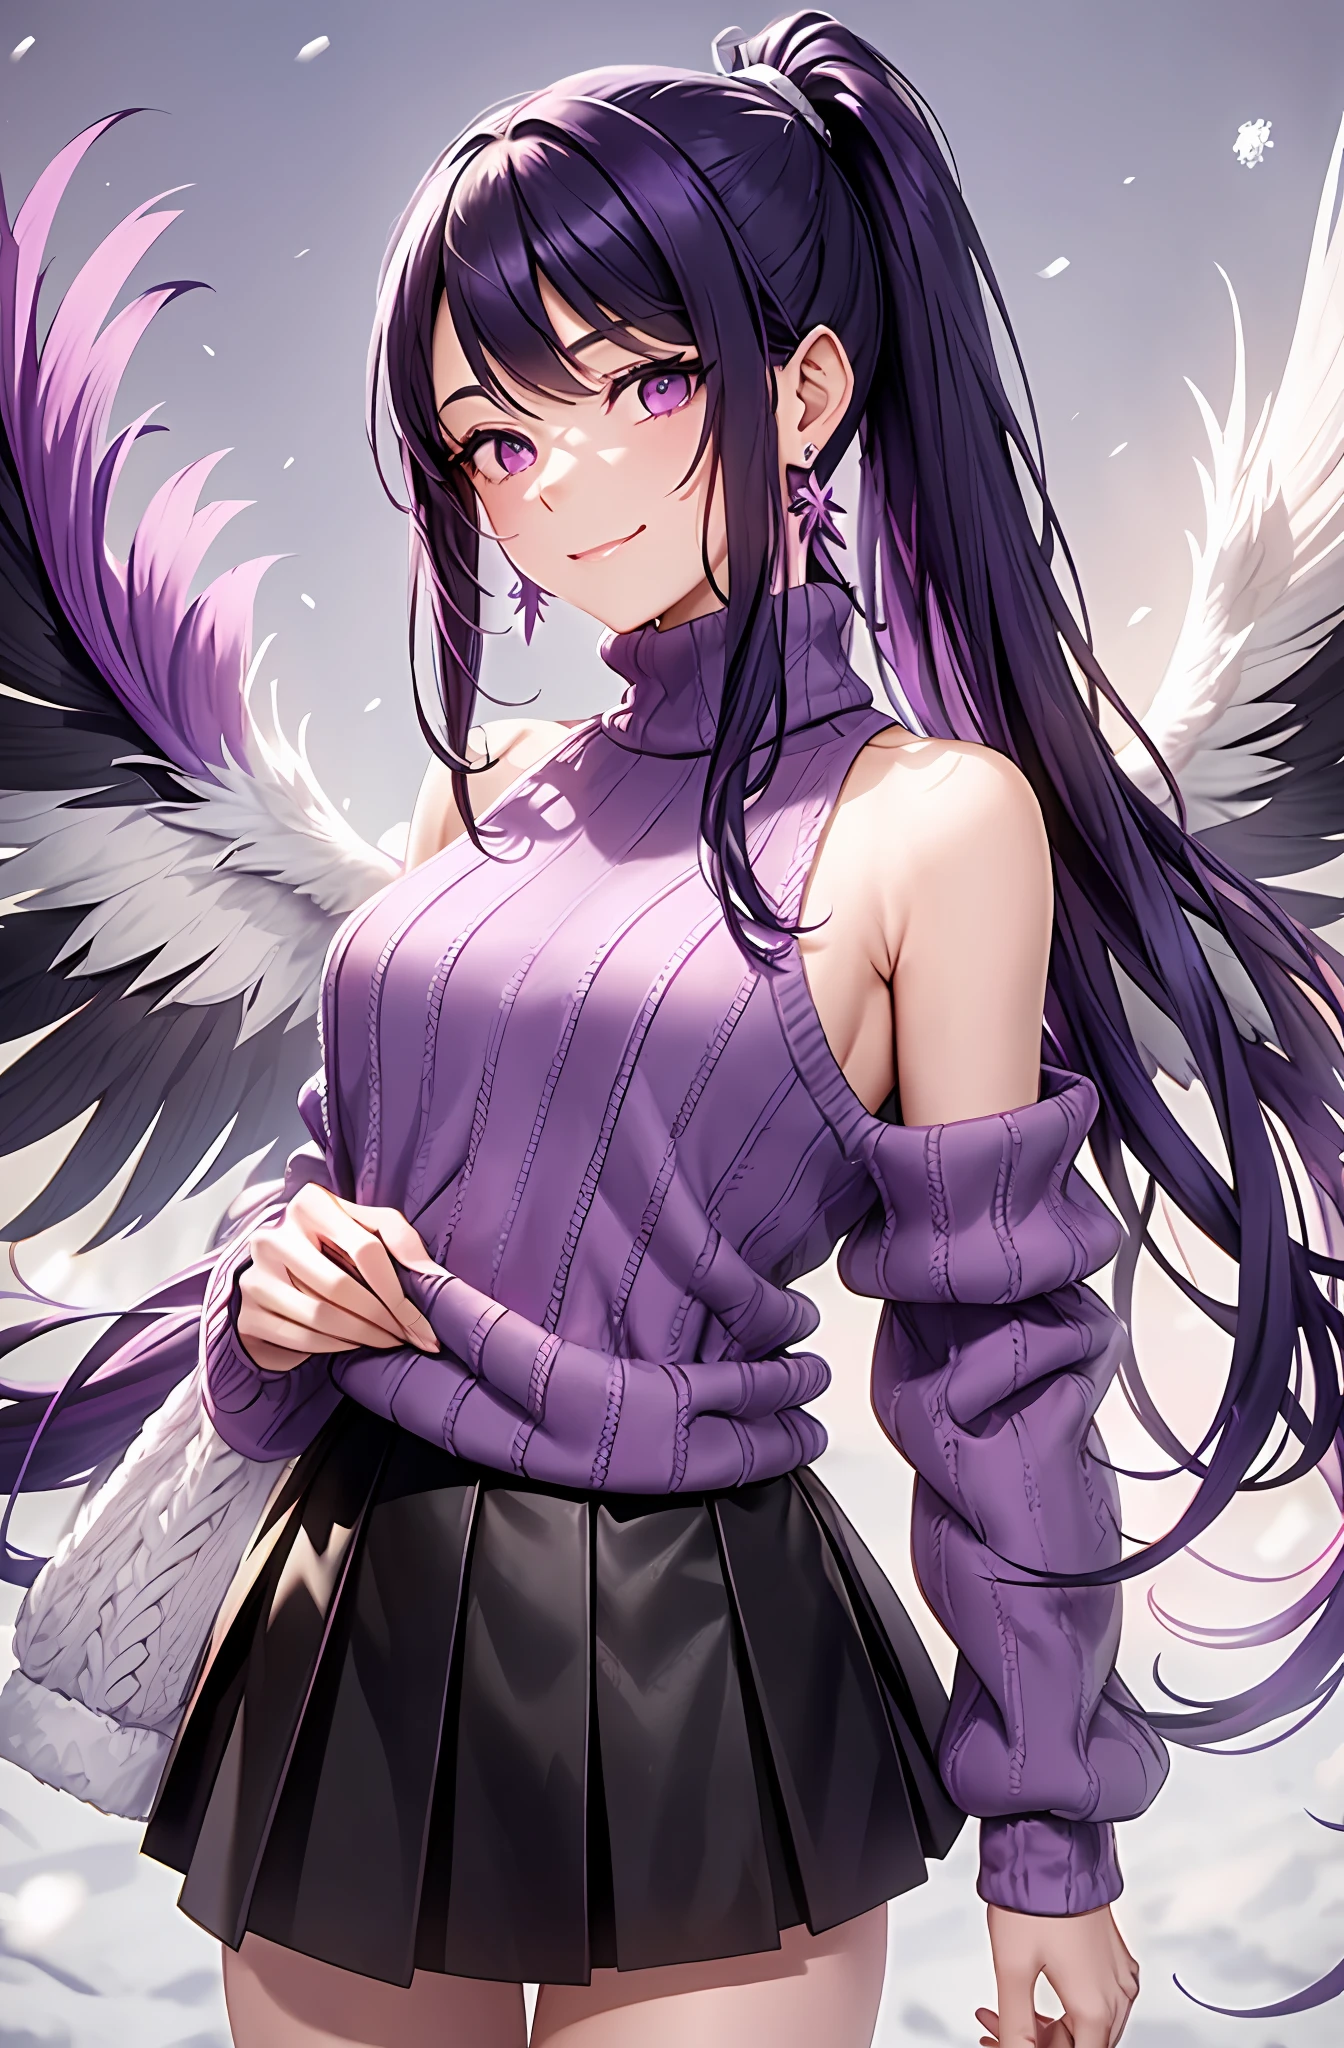 Ponytail. Longhair. Smile, purple hair. Earring. Divine wings on the back. Flip up the skirt. Slender body. Snow. Winter clothes. Muffler. Sweater. Shoulder out. Purple Wings